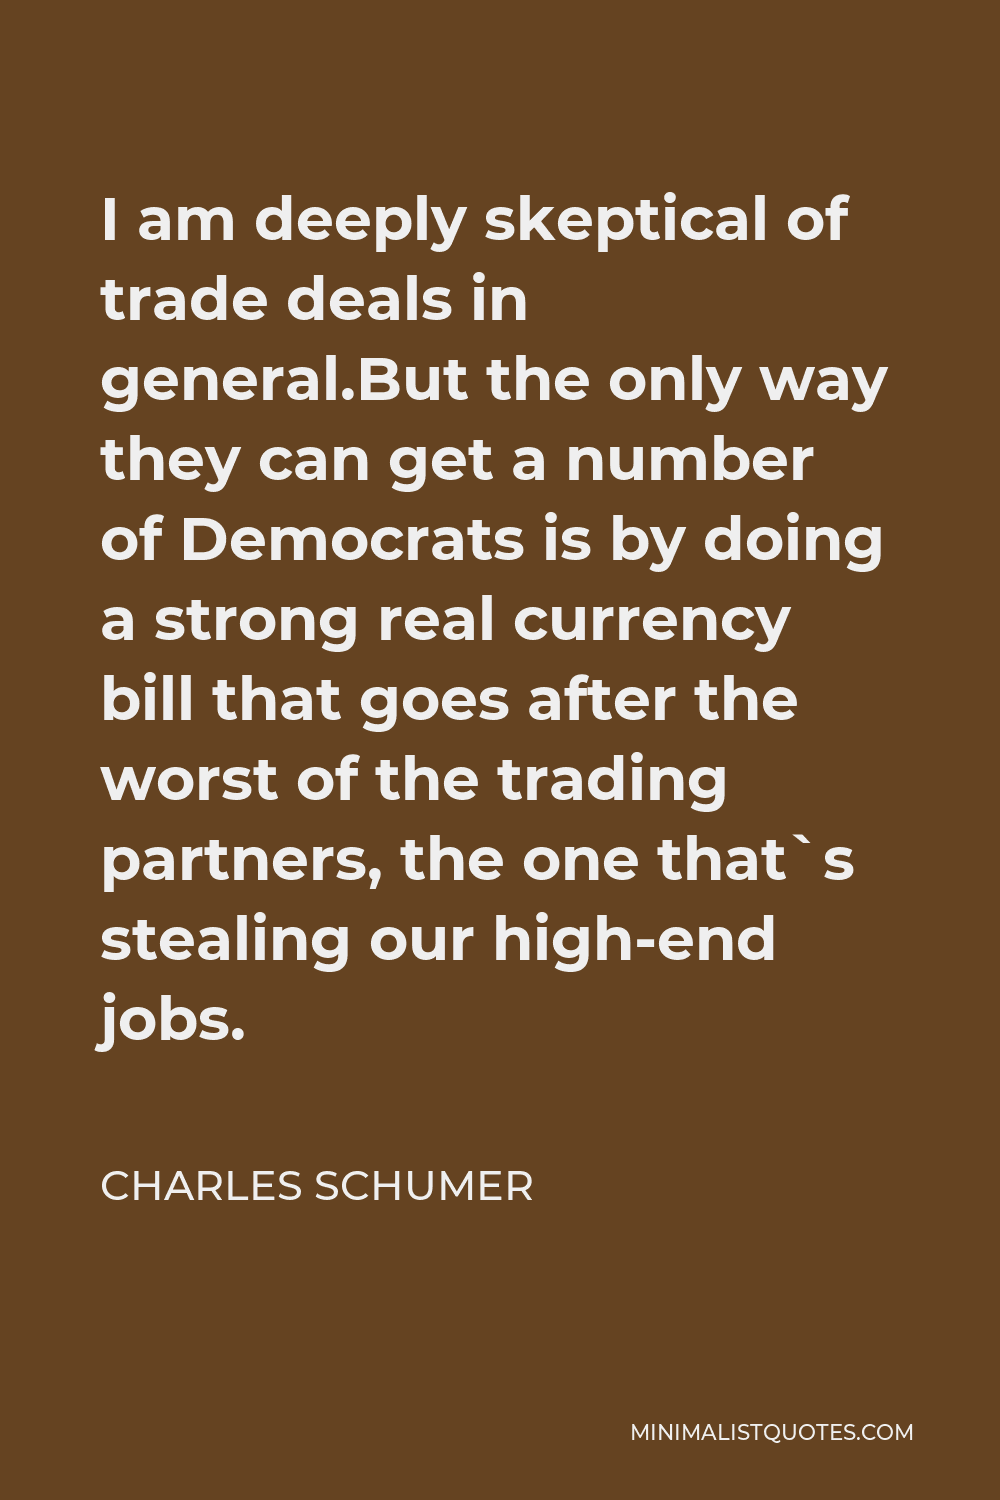 Charles Schumer Quote - I am deeply skeptical of trade deals in general.But the only way they can get a number of Democrats is by doing a strong real currency bill that goes after the worst of the trading partners, the one that`s stealing our high-end jobs.